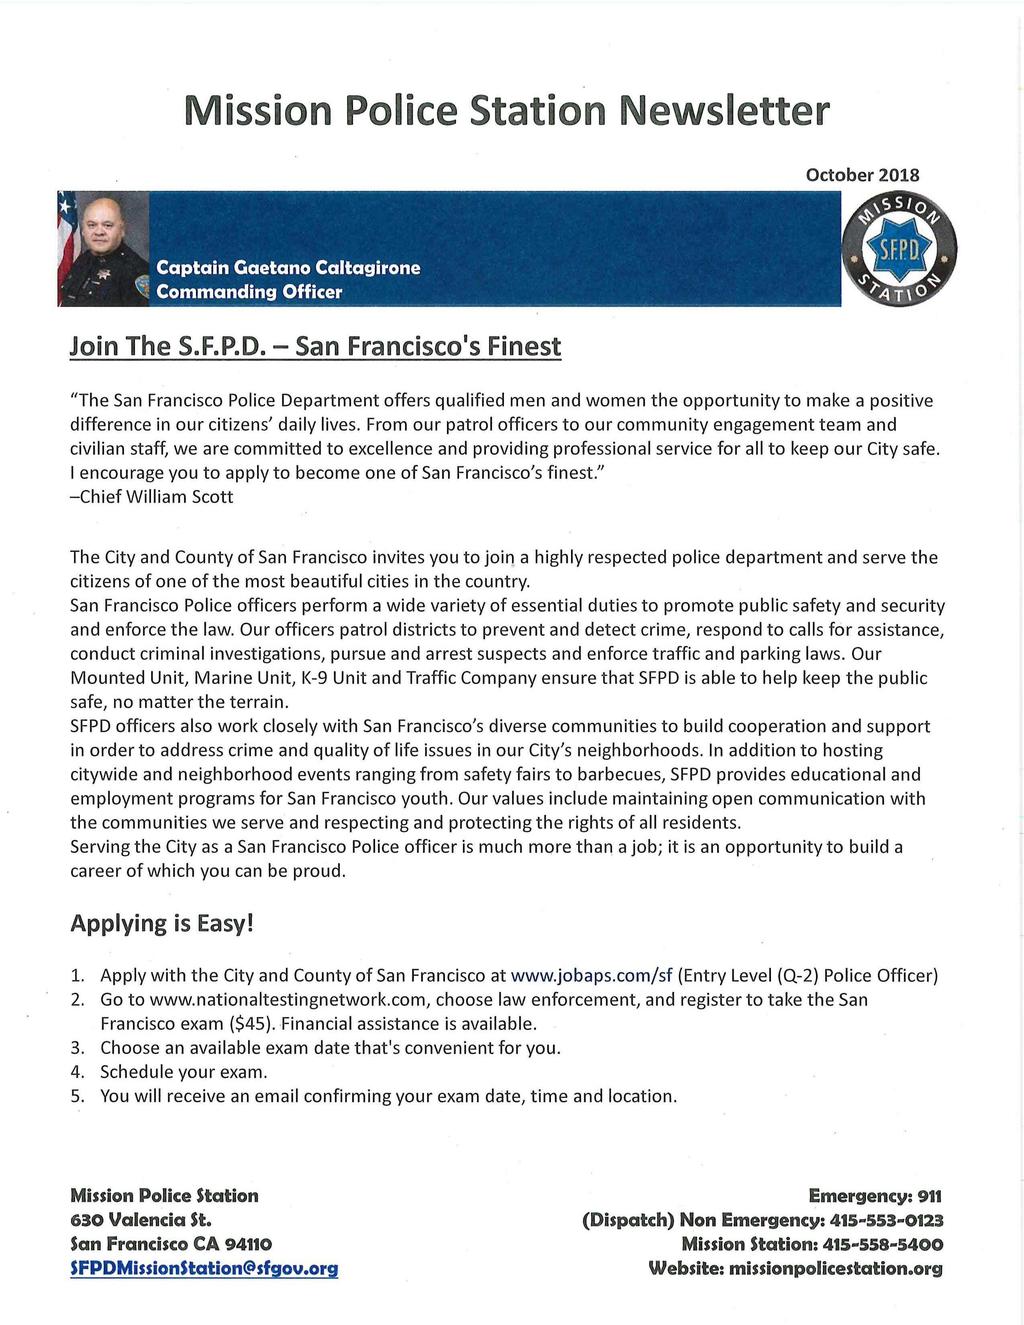 Join The S.F.P.D. San Francisco's Finest "The San Francisco Police Department offers qualified men and women the opportunity to make a positive difference in our citizens' daily lives.